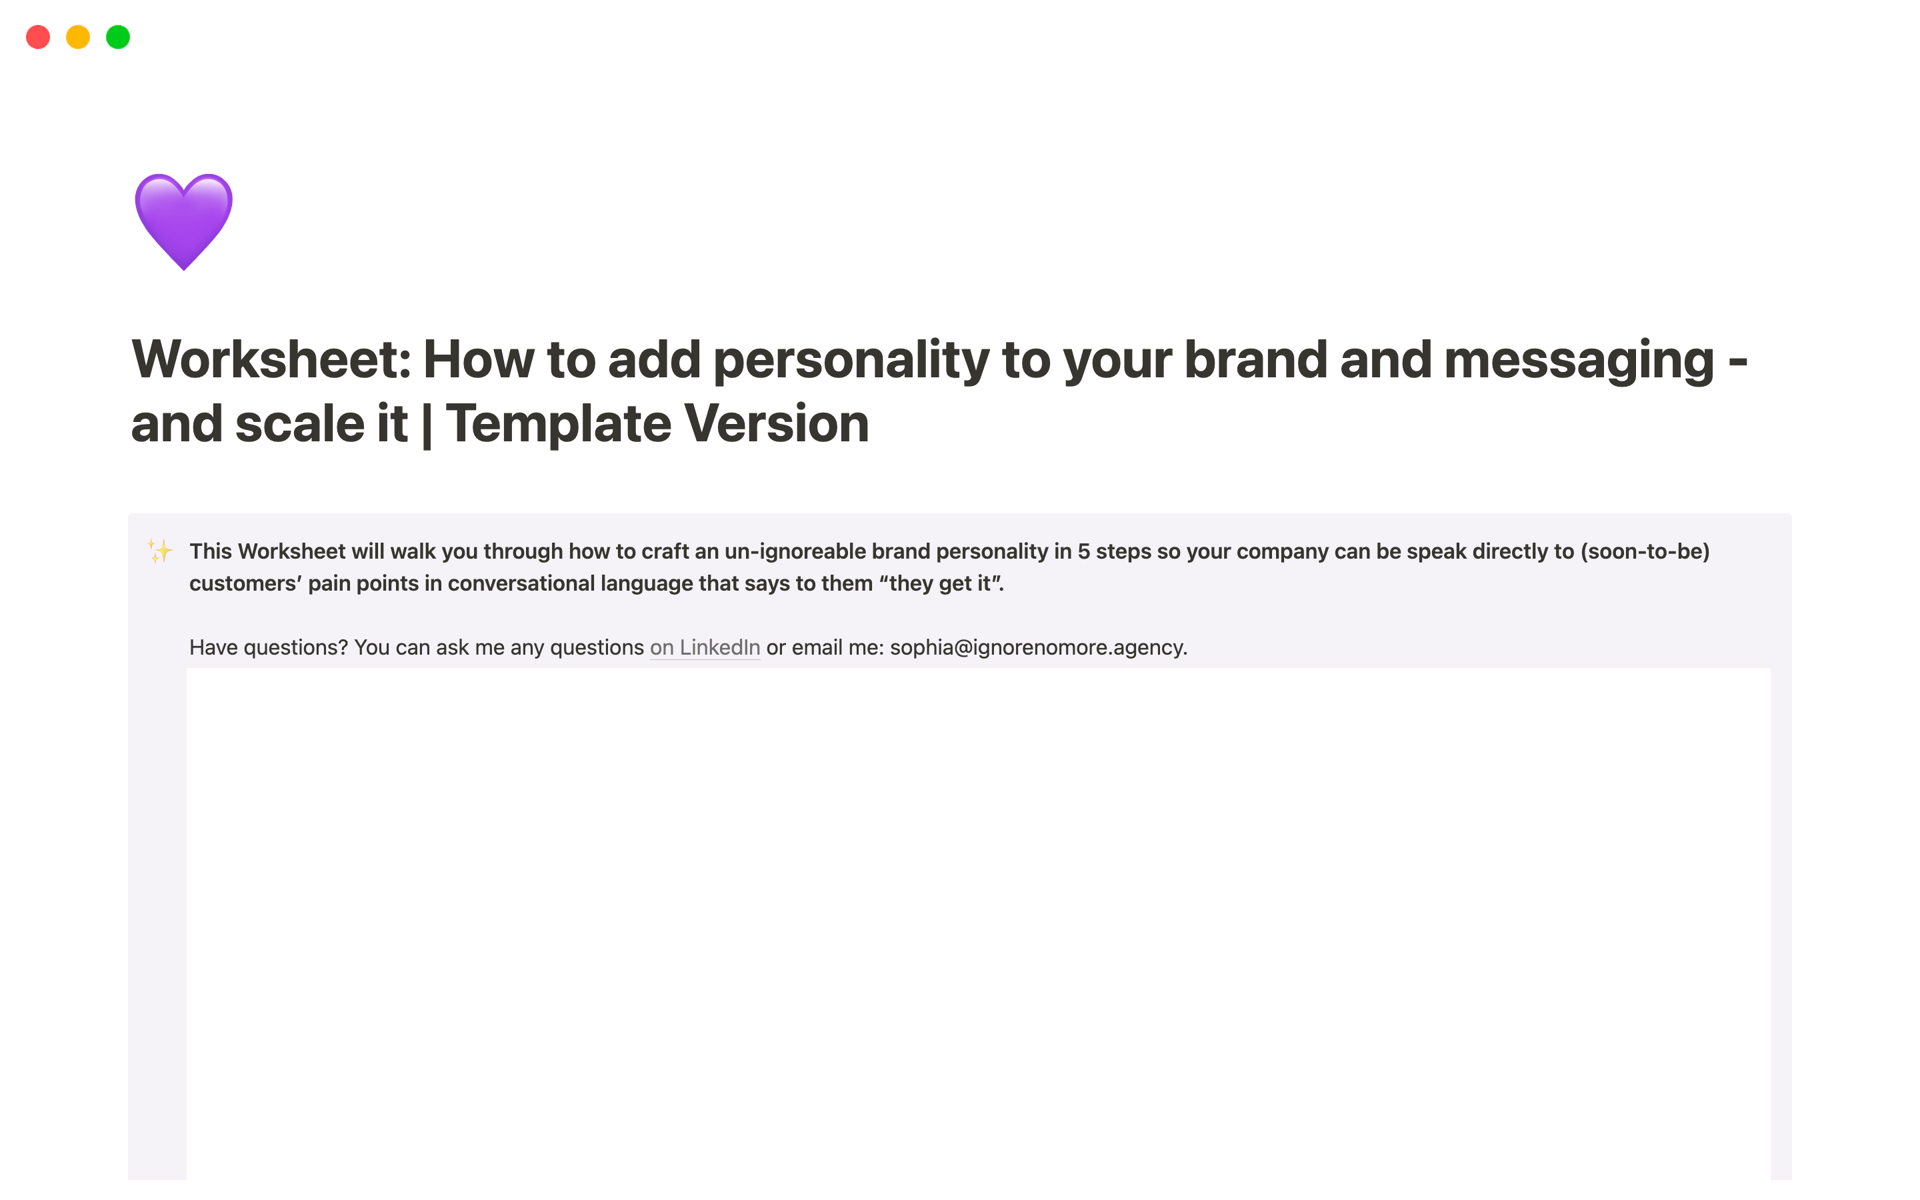 This Worksheet is a 5-step guide to building an un-ignoreable brand personality and messaging to match. 